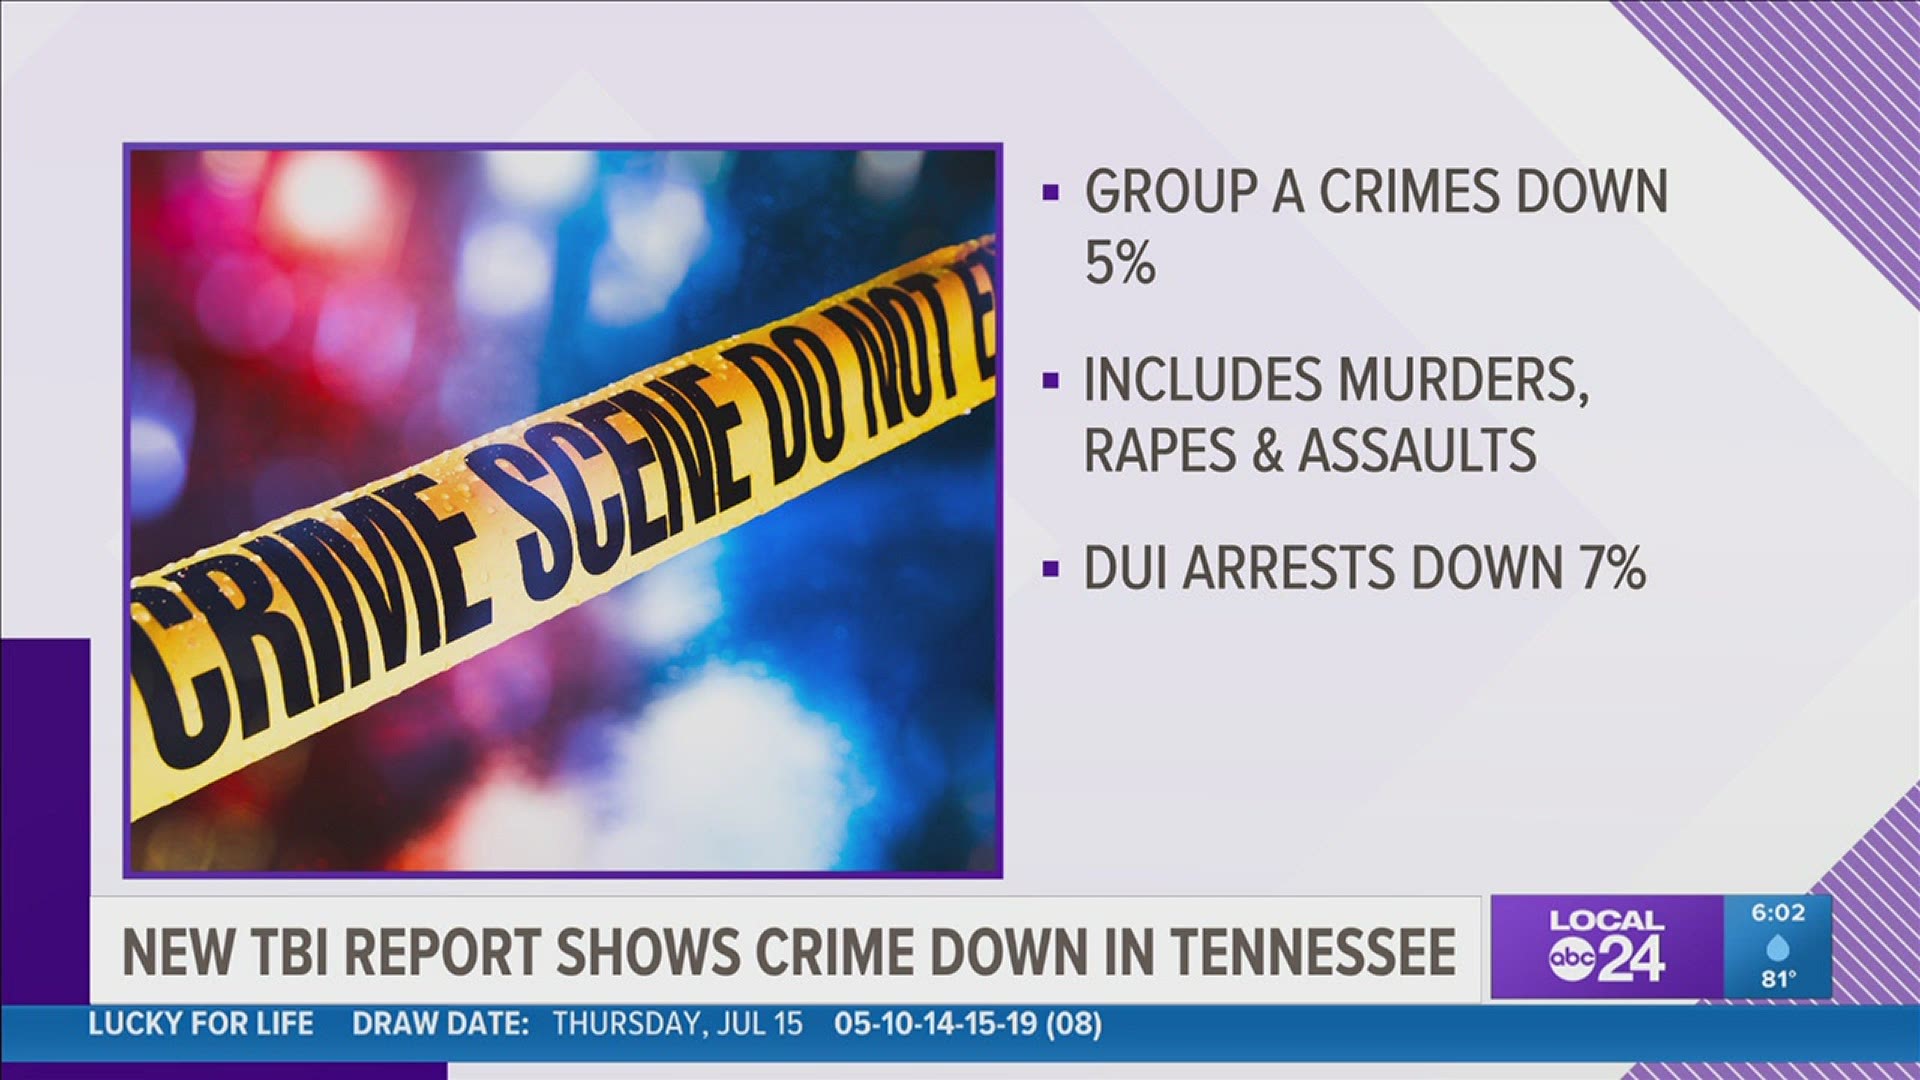 Tennessee Bureau of Investigation says the decline in crime is partly because so many workplaces, schools, and other venues were forced to close during the pandemic.